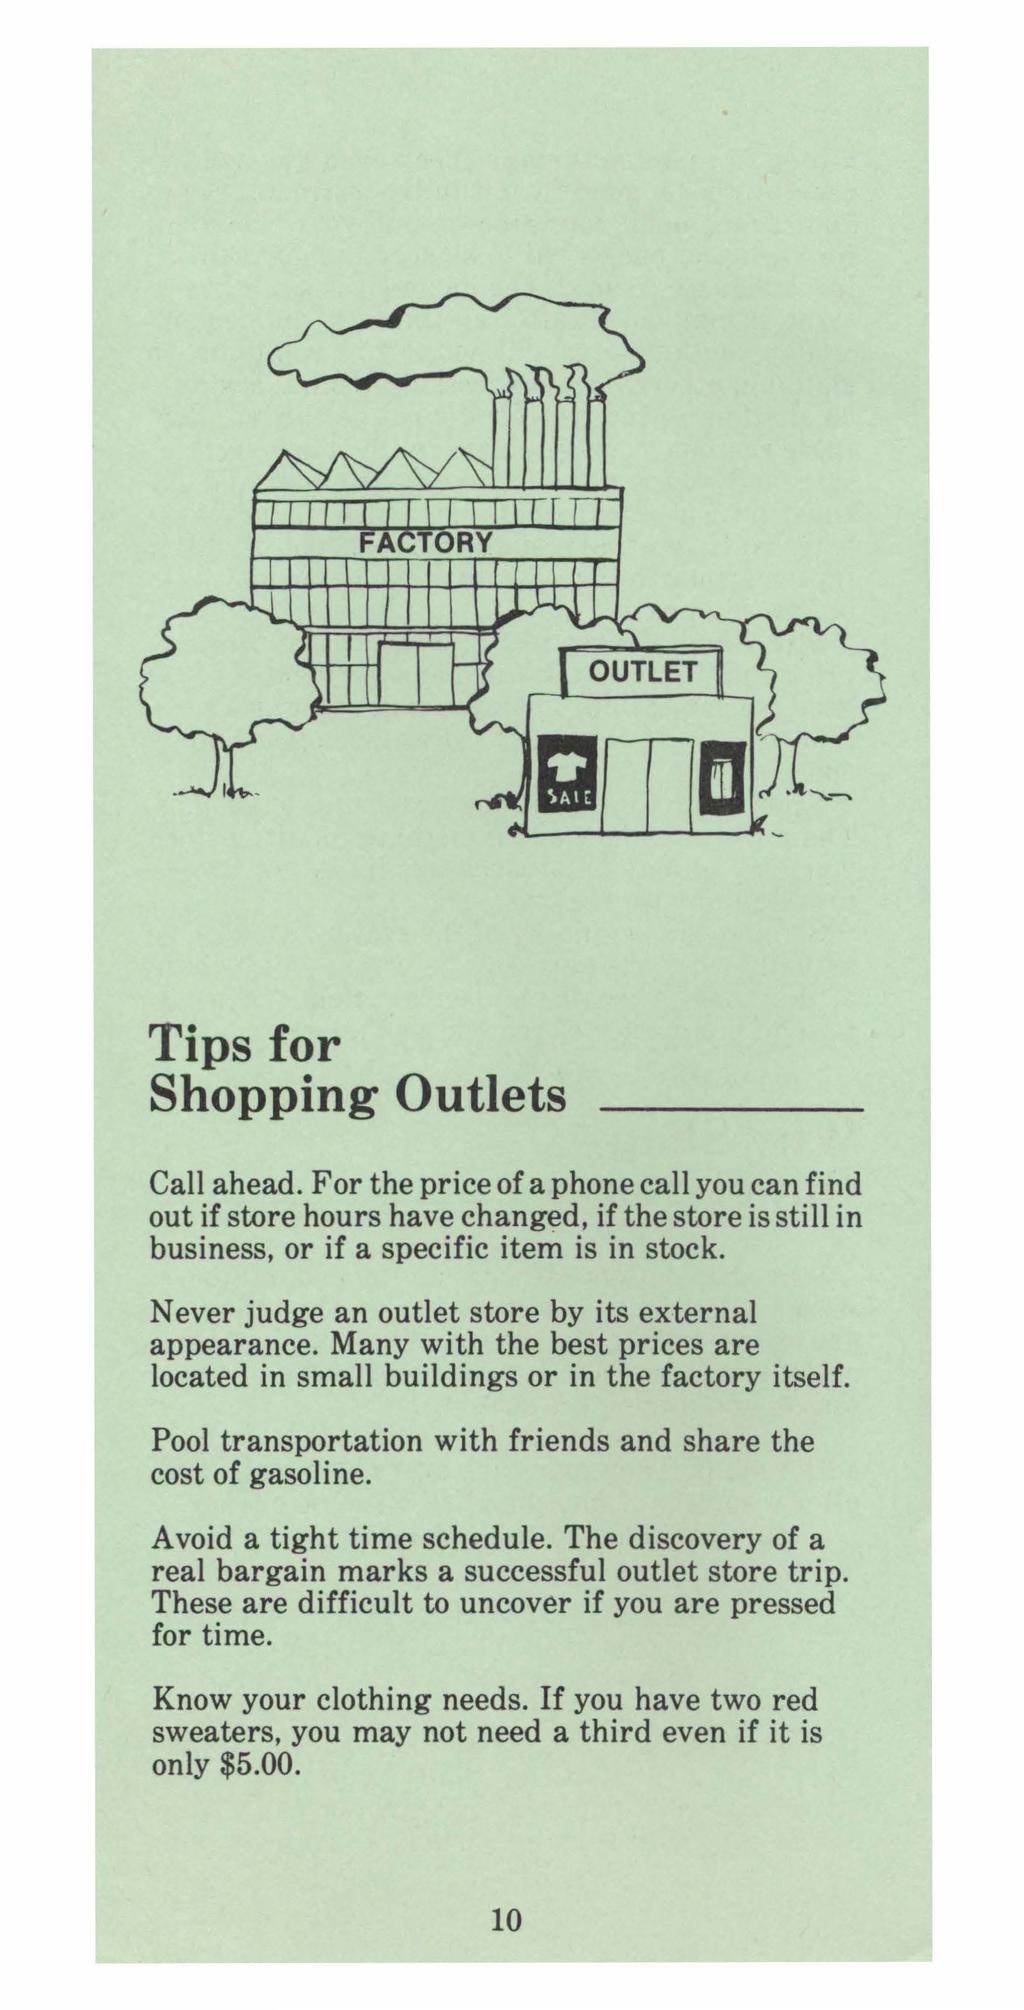 Tips for Shopping Outlets Call ahead. For the price of a phone call you can find out if store hours have changed, if the store is still in business, or if a specific item is in stock.